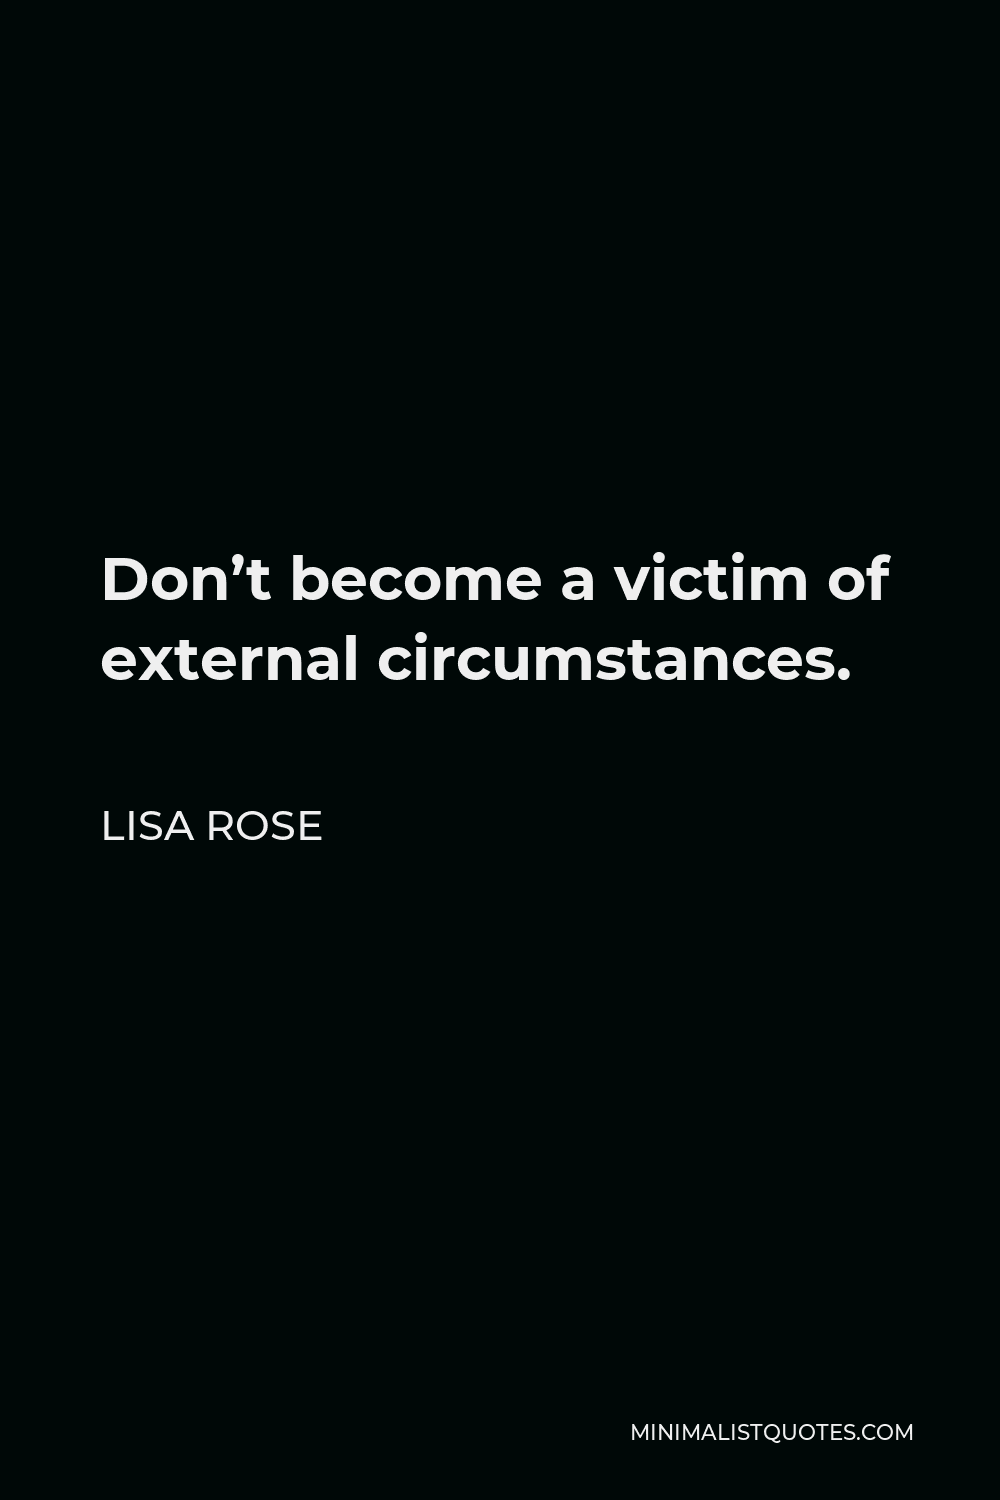 Lisa Rose Quote - Don’t become a victim of external circumstances.